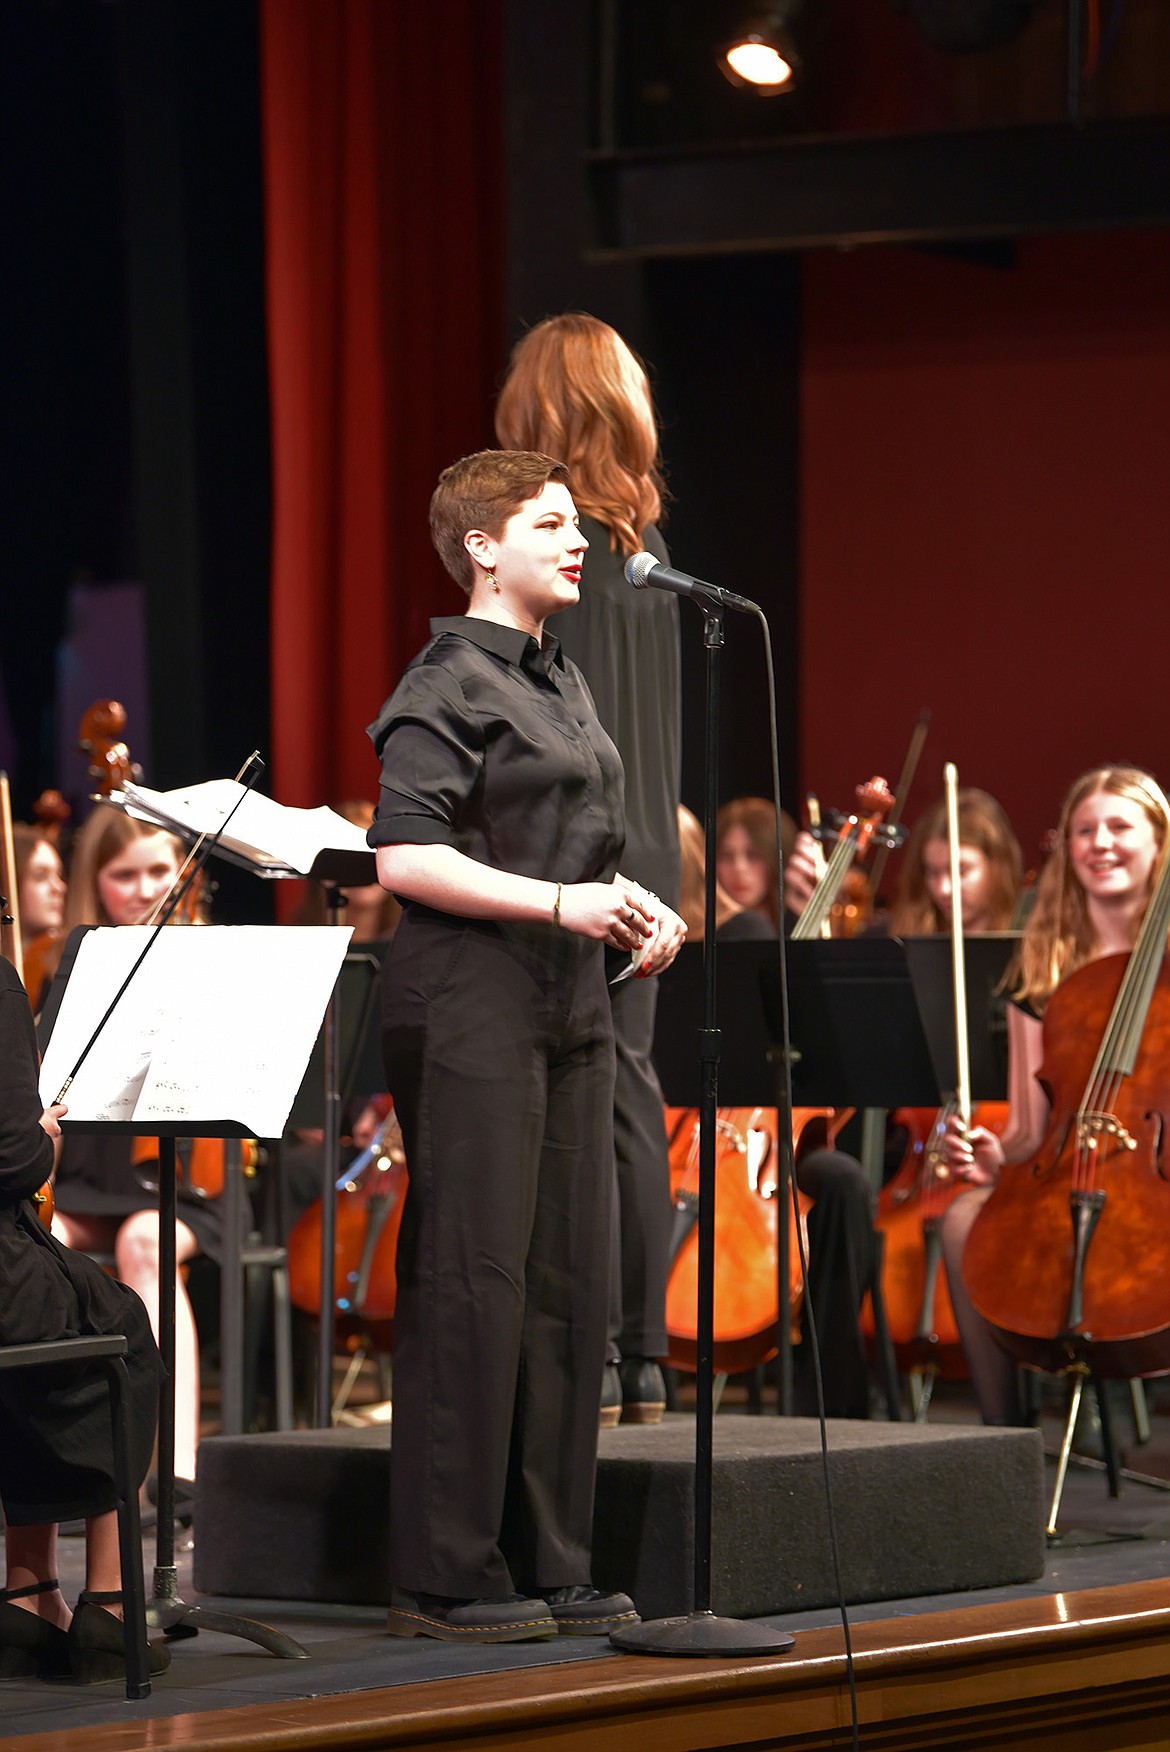 Mosby Stiffler, bass player, introduces a piece at the eighth grade orchestra concert. (Julie Engler/Whitefish Pilot)